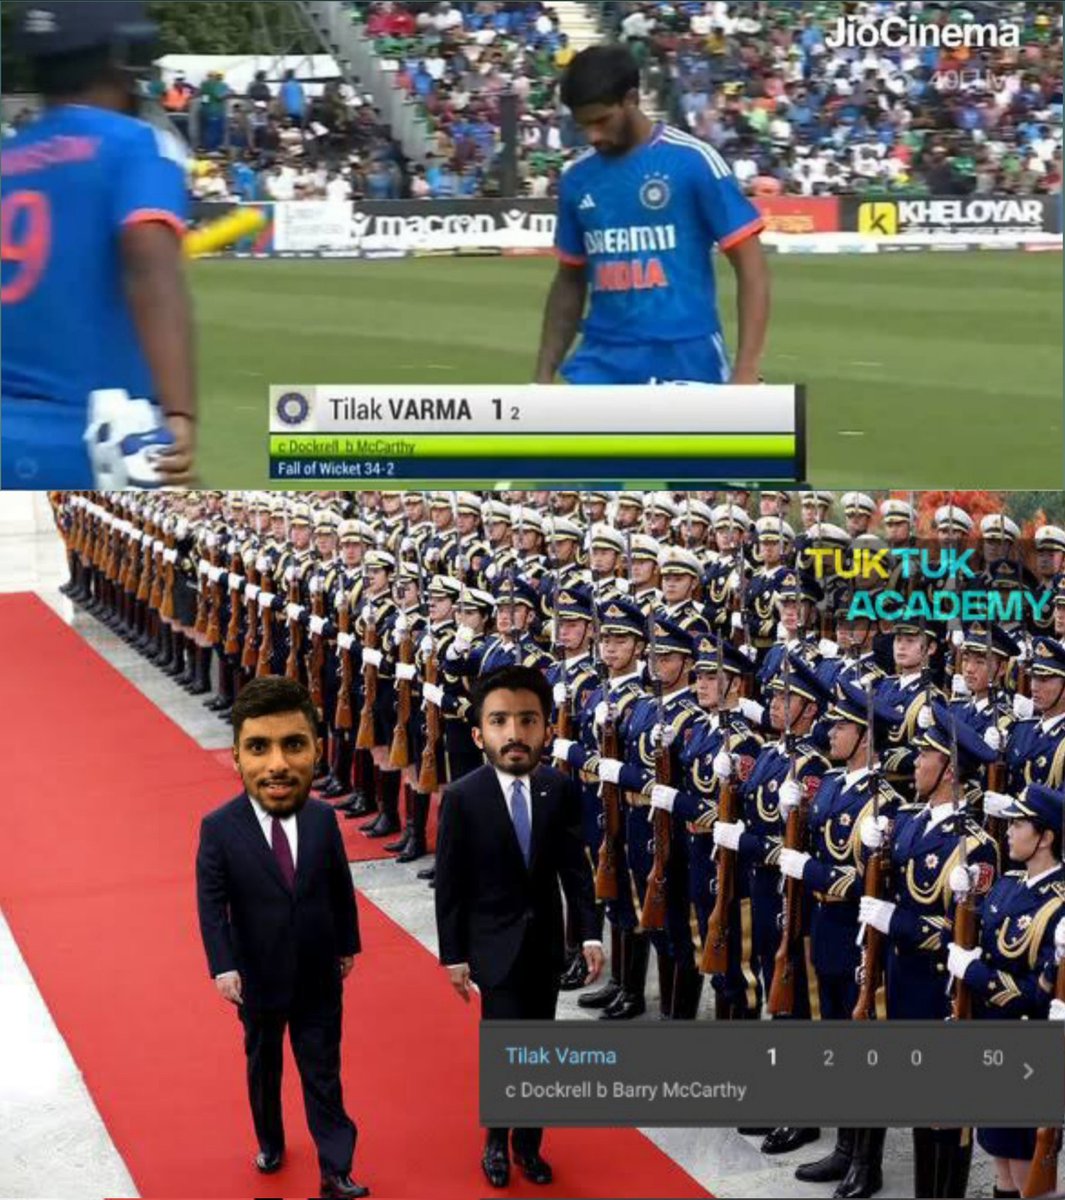 Missed the well deserved back to back Golden ducks by just one run💔

They hyped Tilak Varma for the Indian team my boy joined the academy instead 🥵🙈

Welcome to the academy visit young lad 🙌 #IREvIND